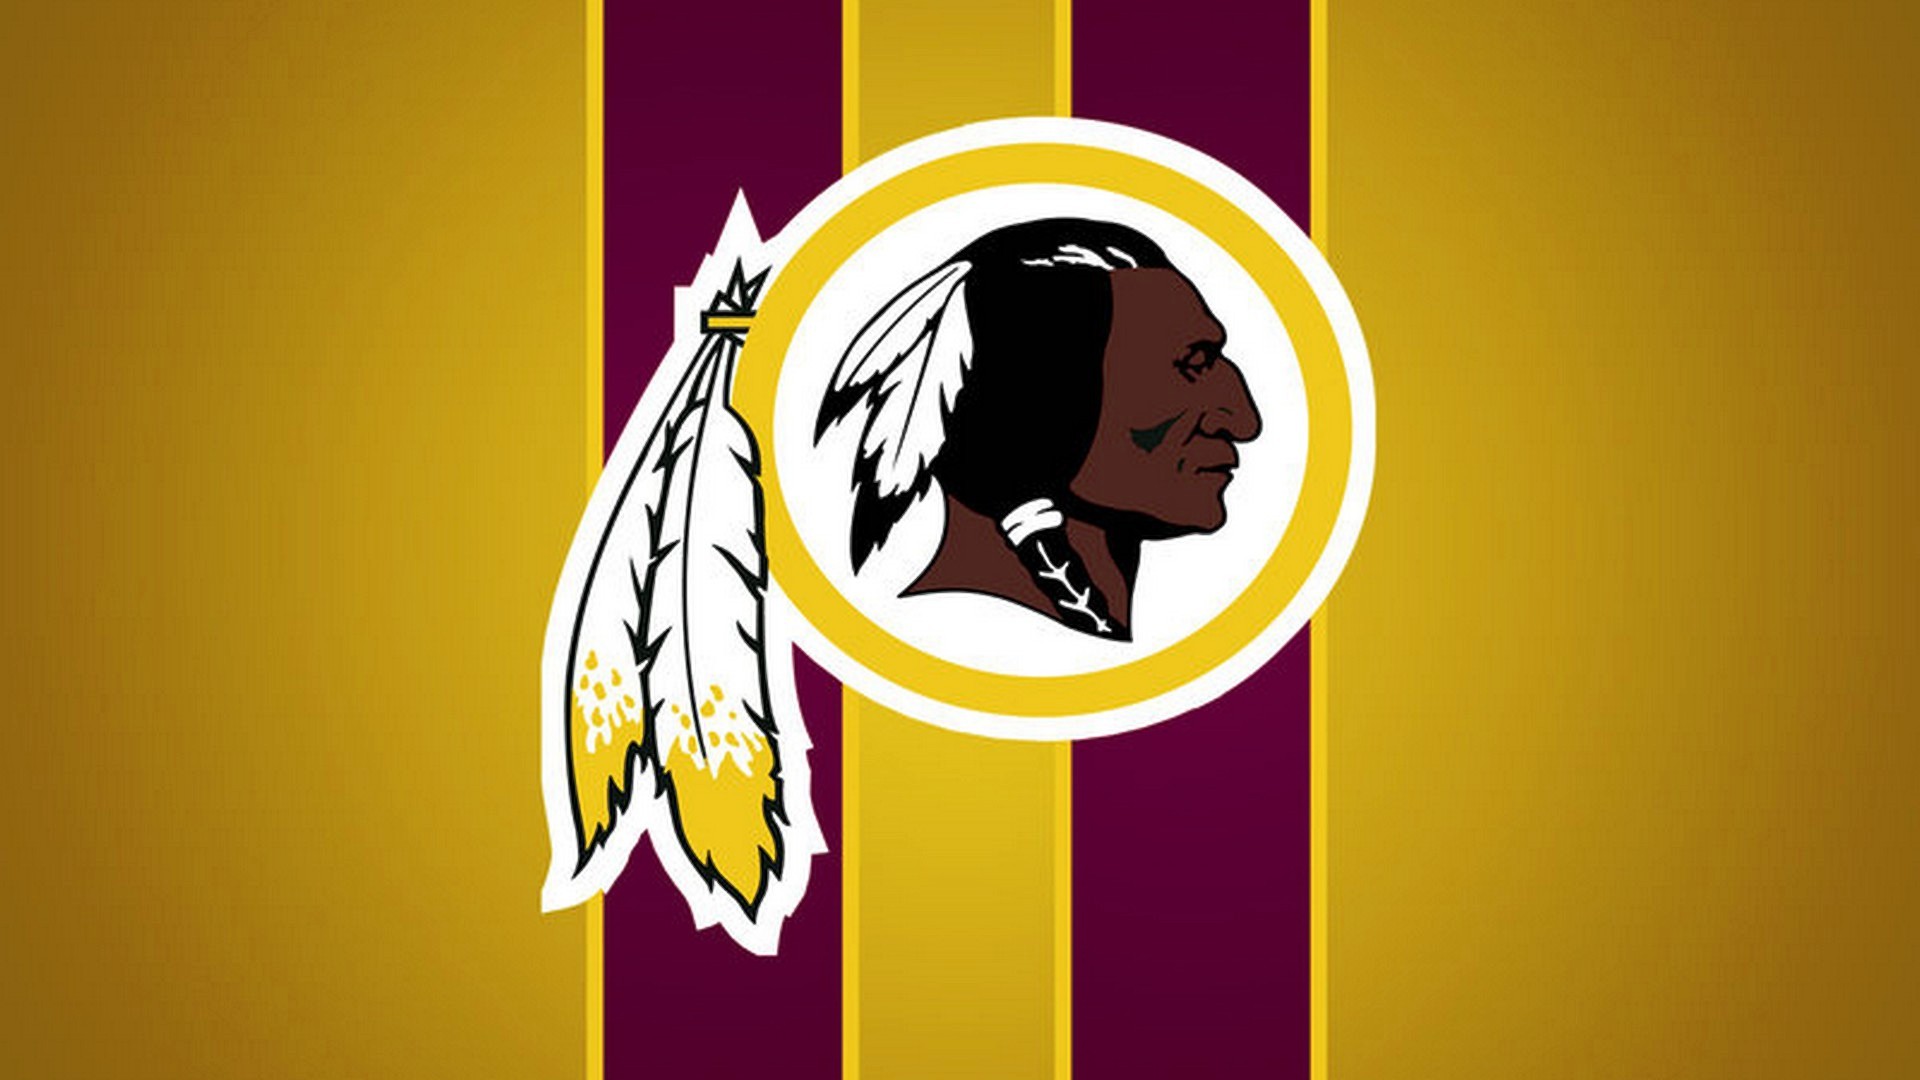 HD Desktop Wallpaper Washington Redskins NFL With high-resolution 1920X1080 pixel. You can use this wallpaper for your Mac or Windows Desktop Background, iPhone, Android or Tablet and another Smartphone device